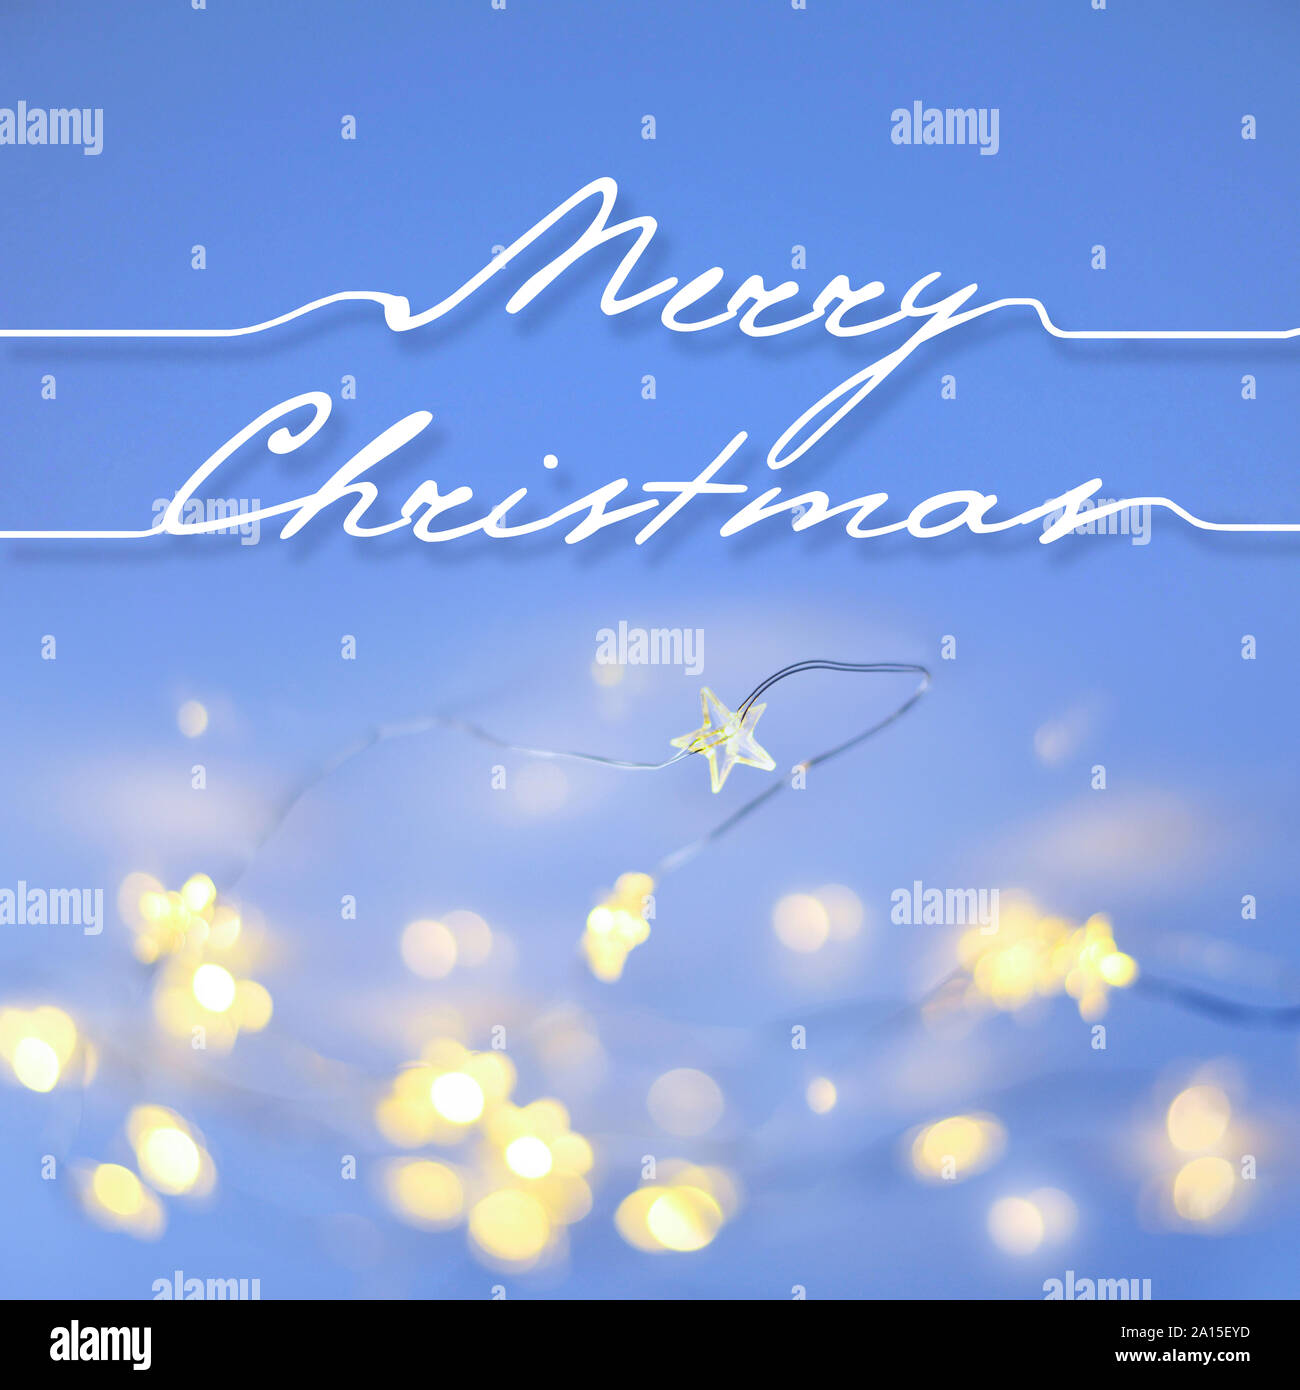 Congratulation 'Merry Christmas' on a blue background with Christmas lights. Christmas festive background Stock Photo